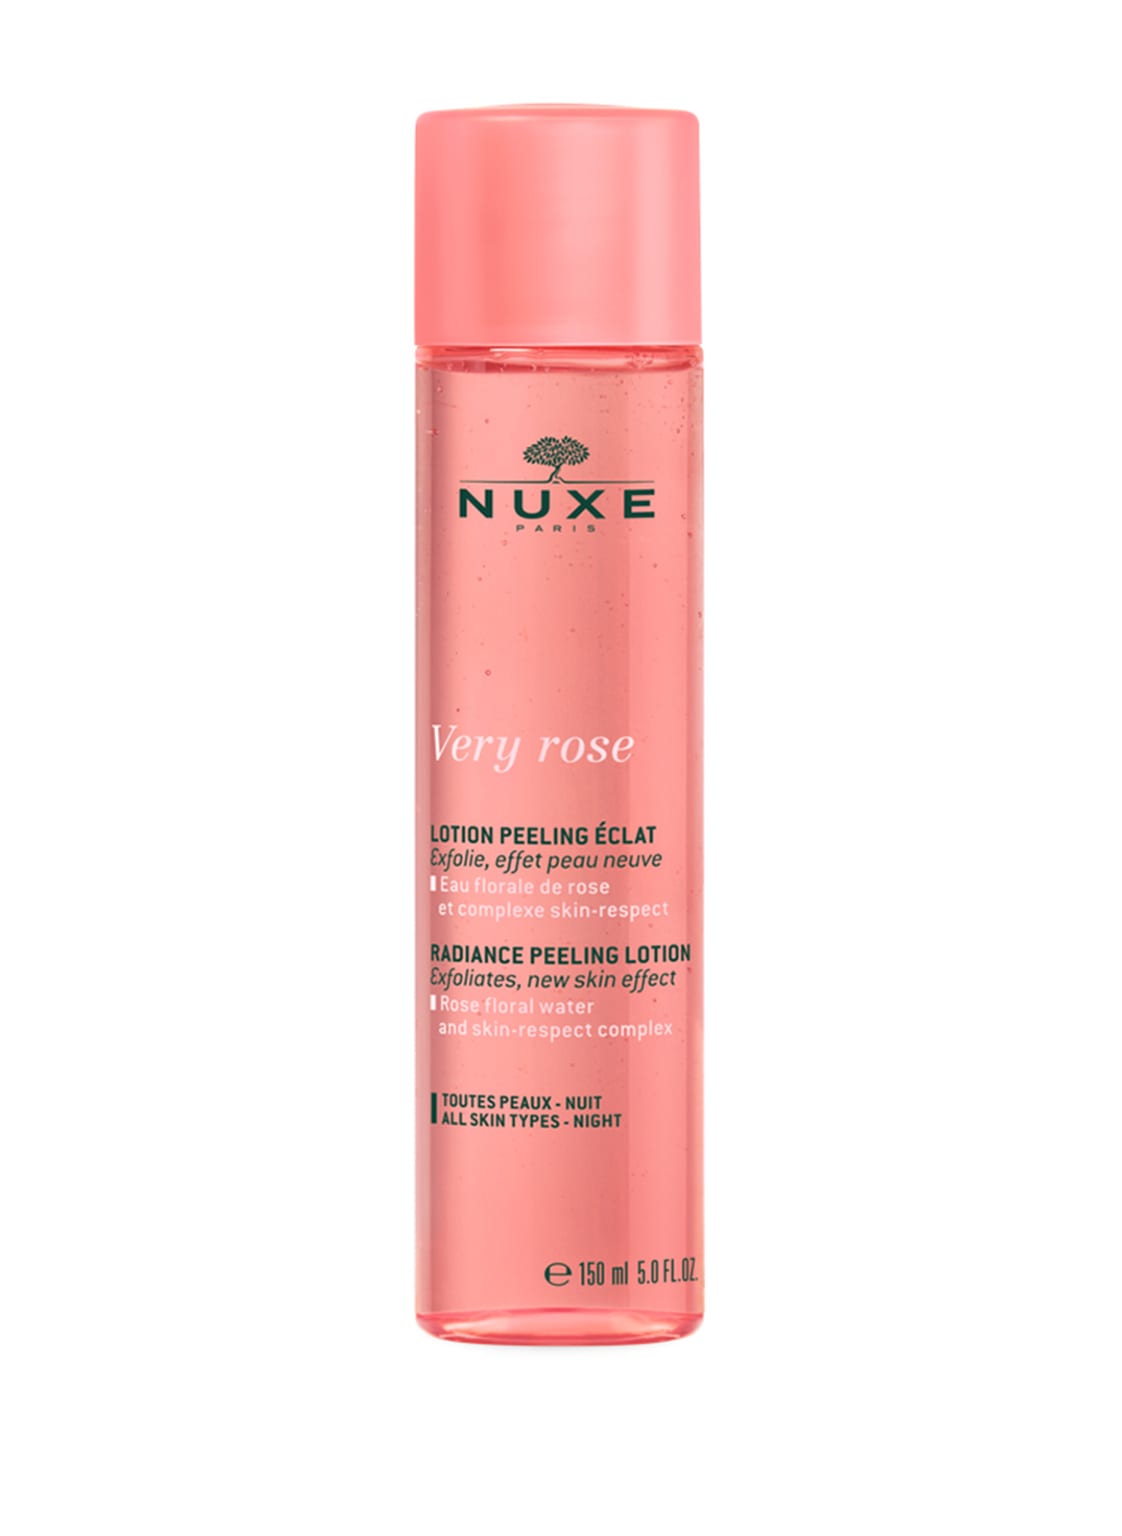 Nuxe Very Rose Radiance Peeling Lotion 150 ml von NUXE